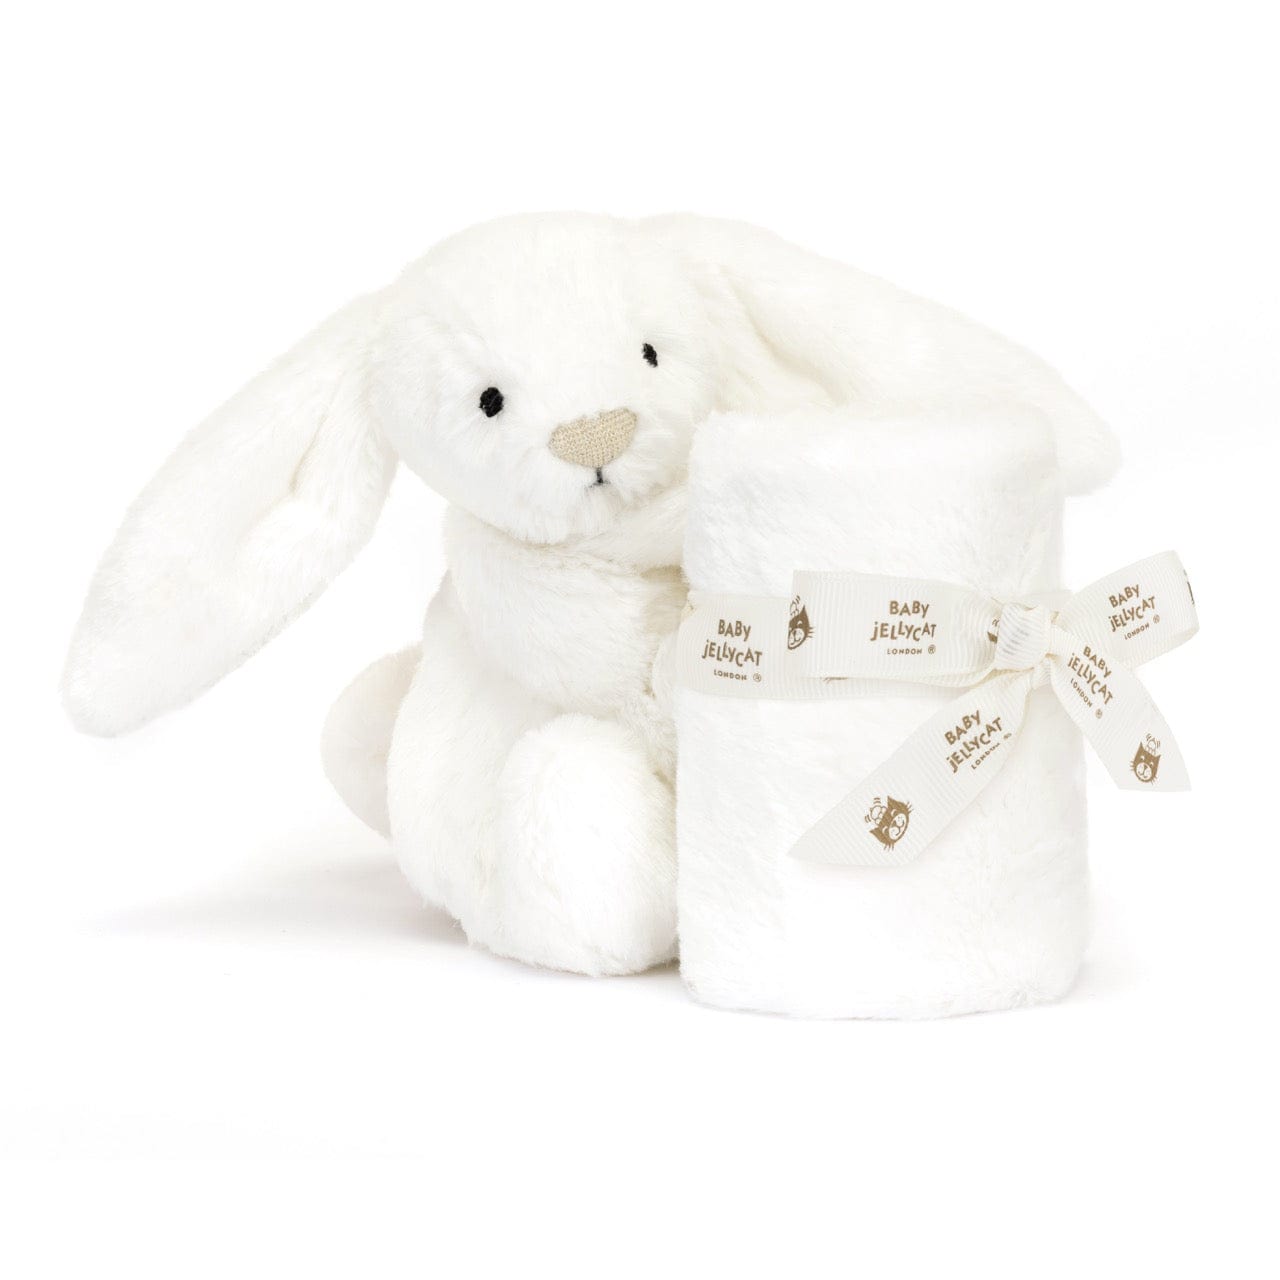 Bashful Luxe Bunny Luna Soother JellyCat JellyCat Lil Tulips